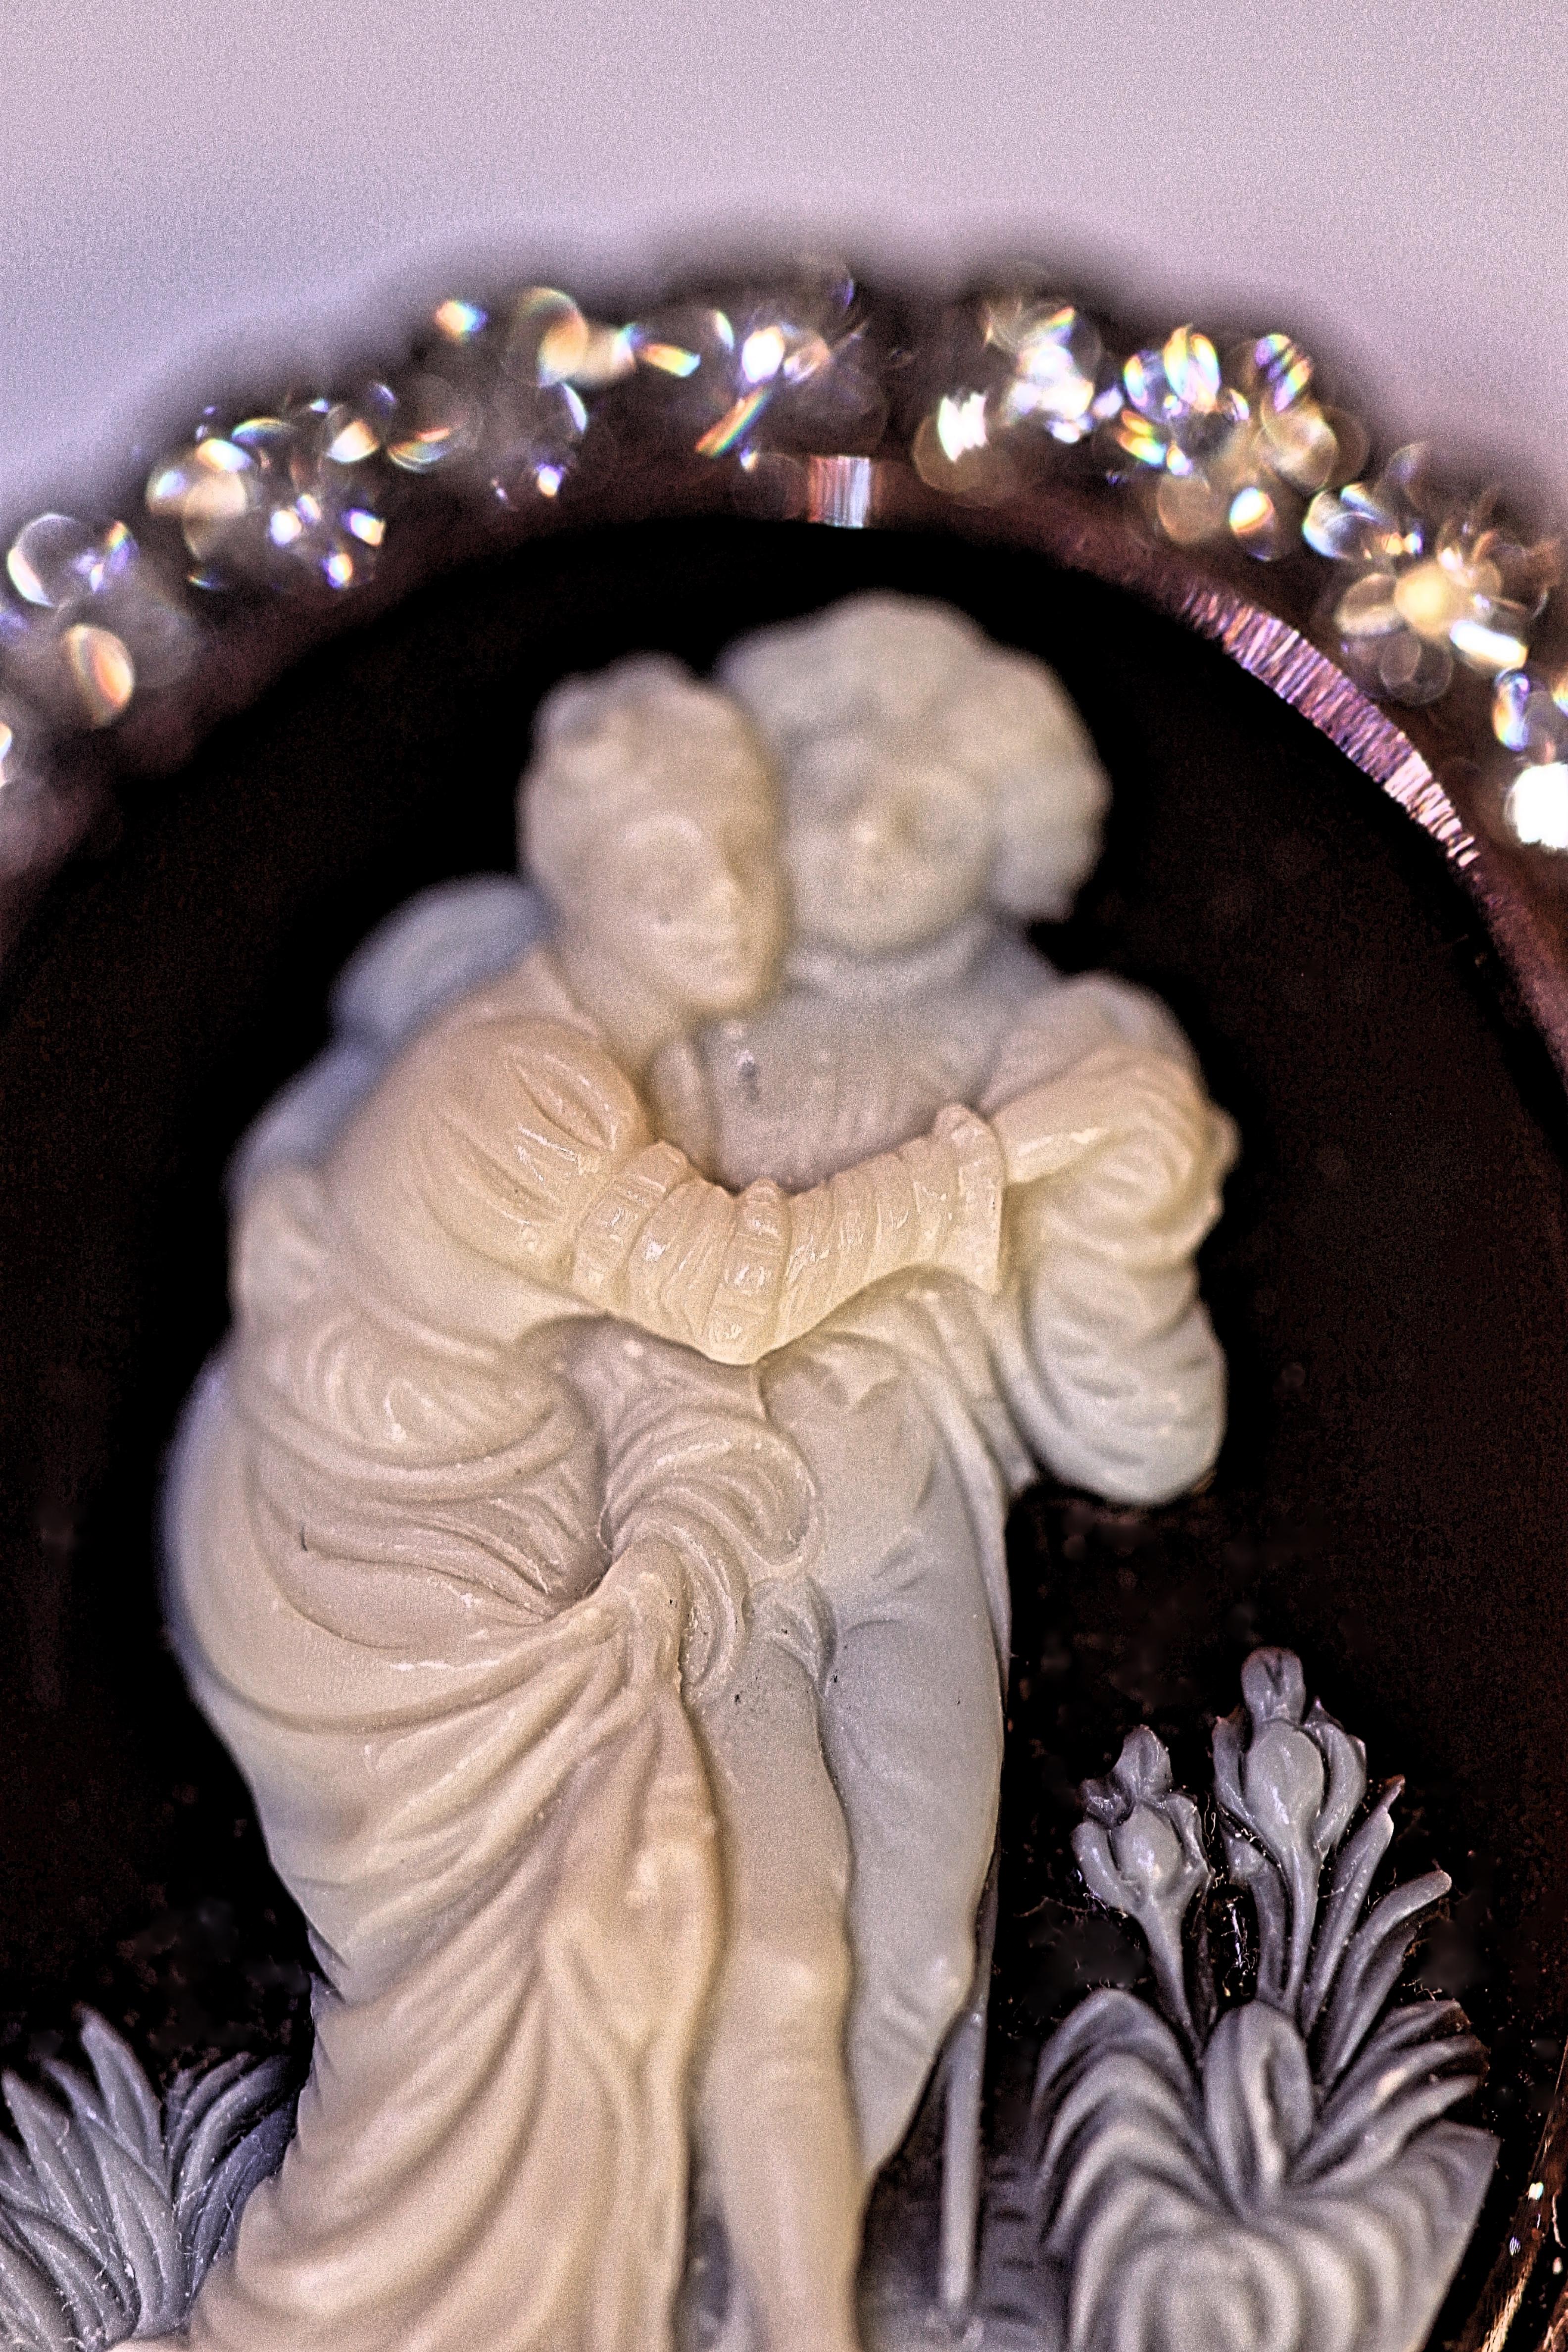 An exquisite agate cameo dating back to circa eighteenth century.  The brown and cream colored cameo is a finely crafted picture of a male and female embracing.  The cameo is surrounded by 32 lively old mine cut diamonds with an approximate weight